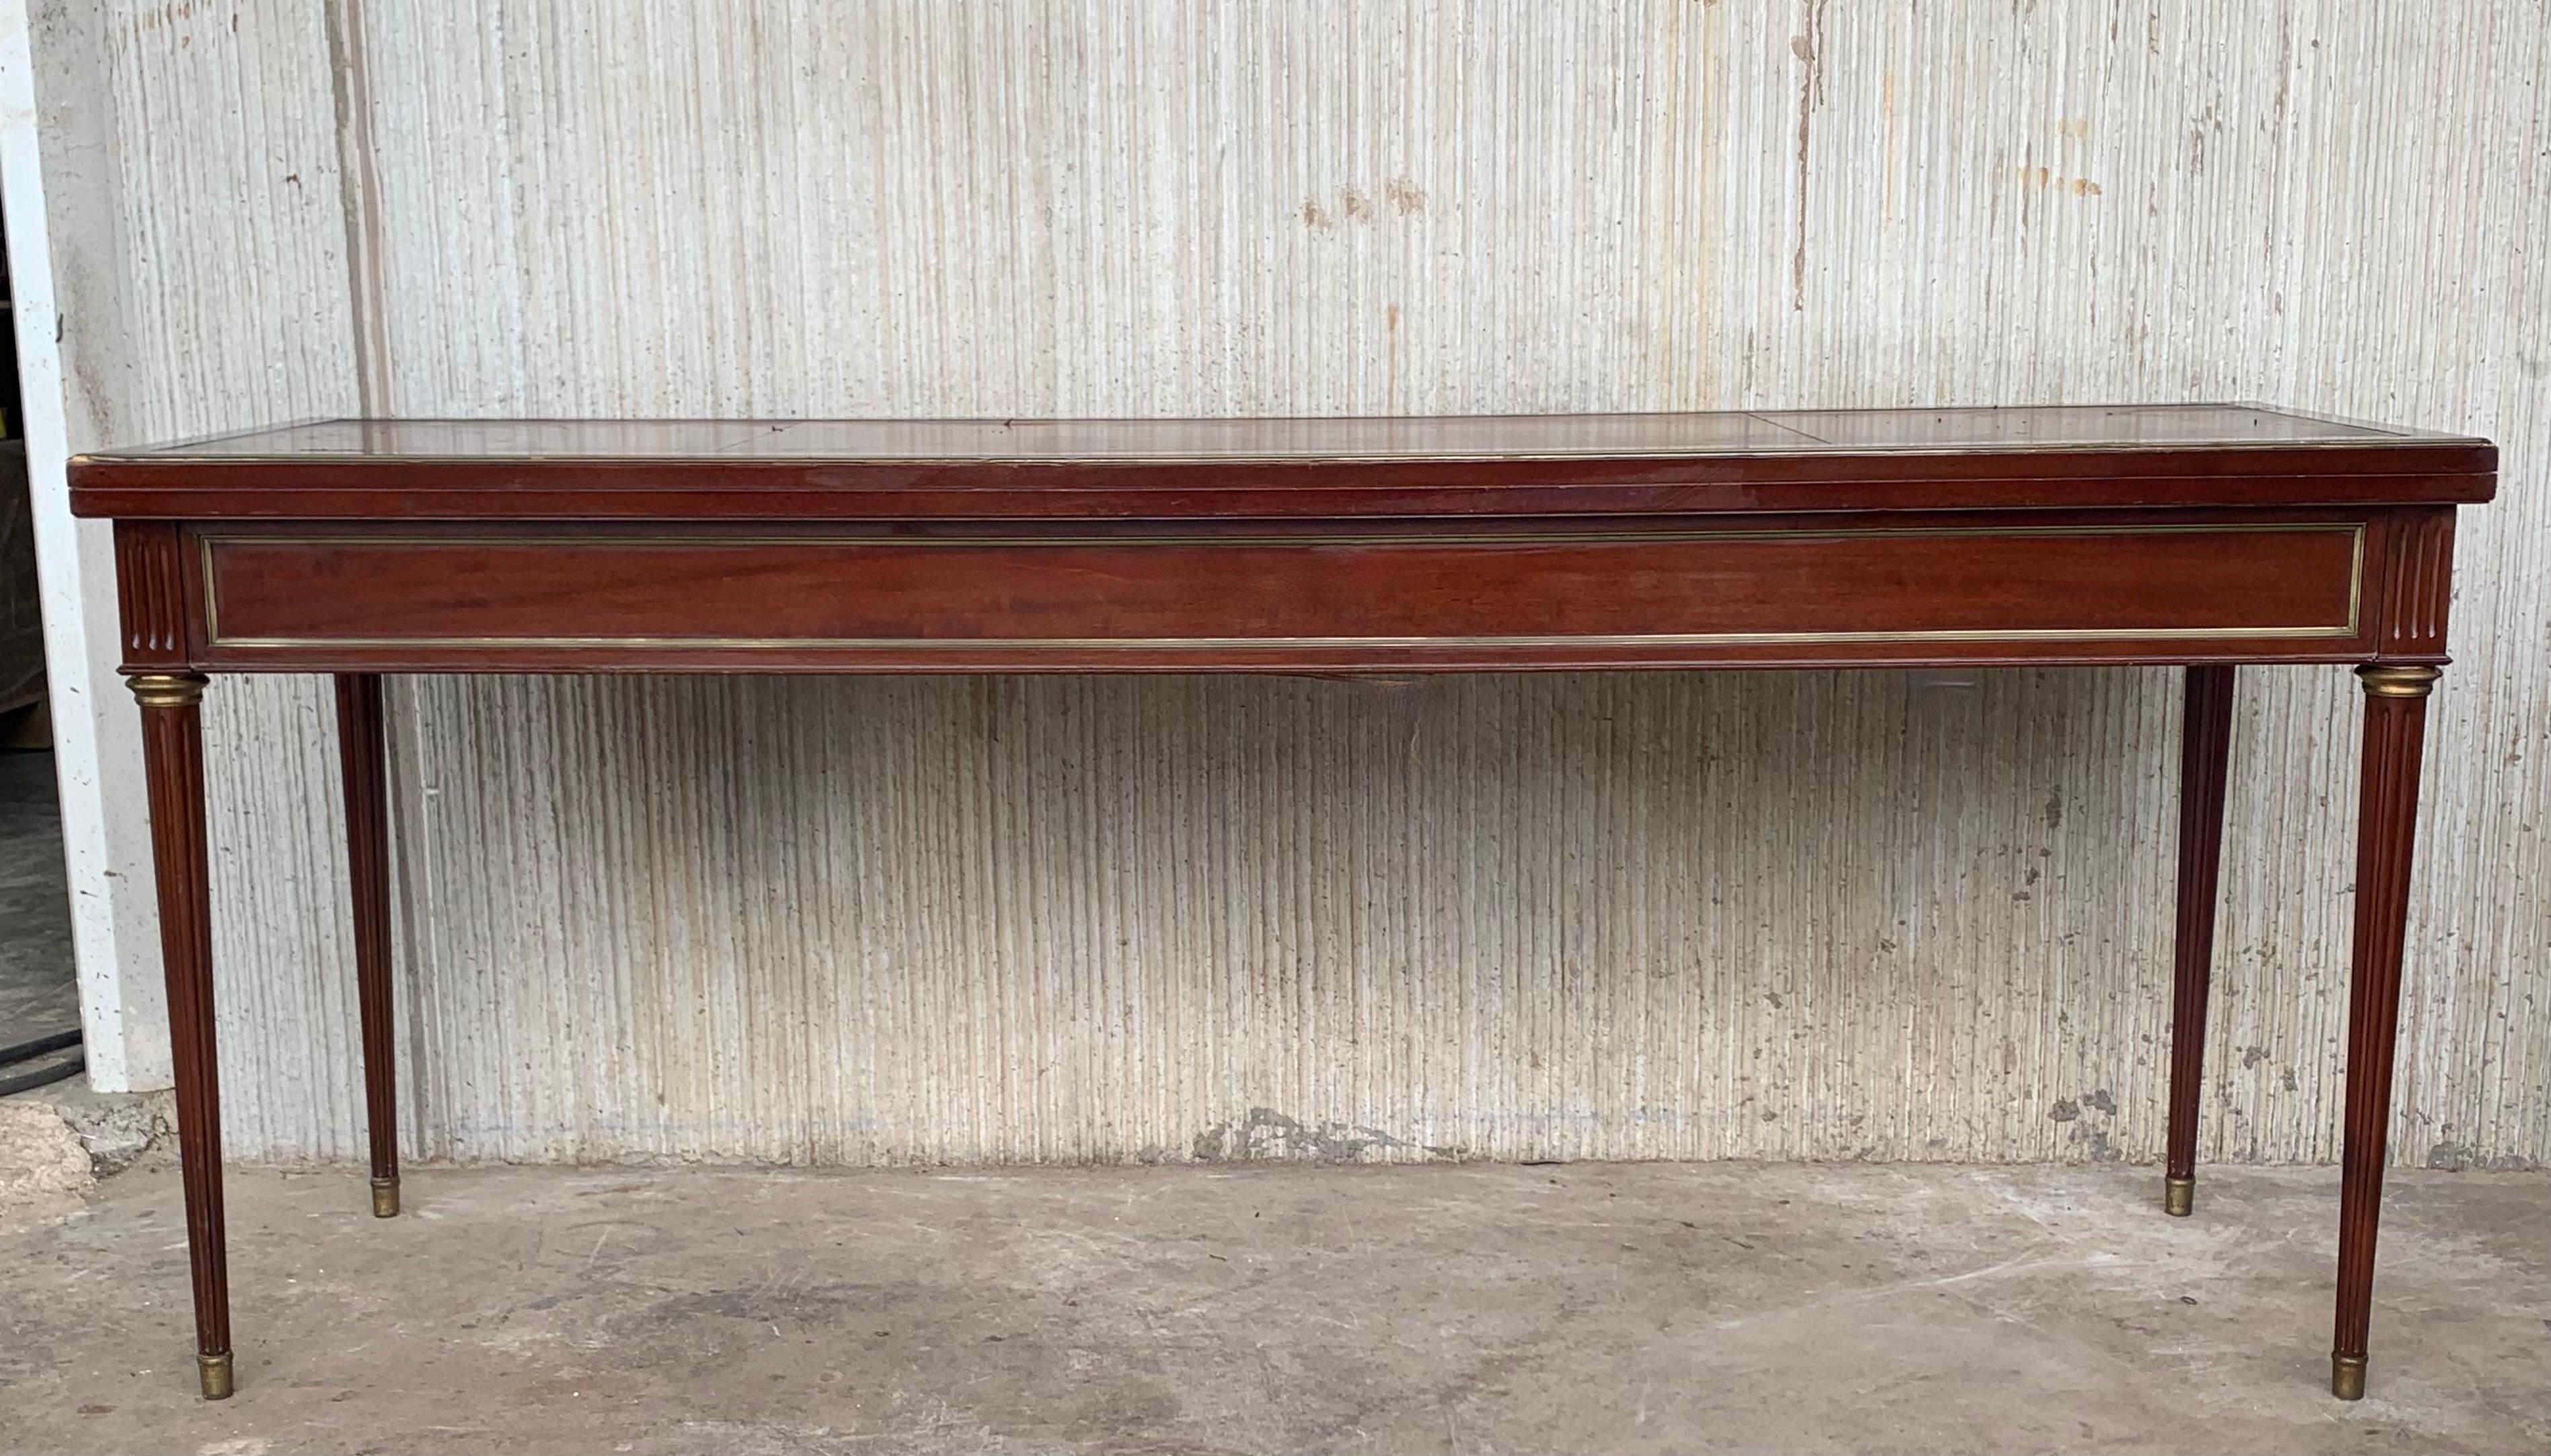 Louis XVI style (19th century) mahogany large console table with a fold-open top, brass trim detail, and tapered fluted legs ending in brass end caps.
The console top has a leather top that it needs to be reupholstered. We will ship the piece with